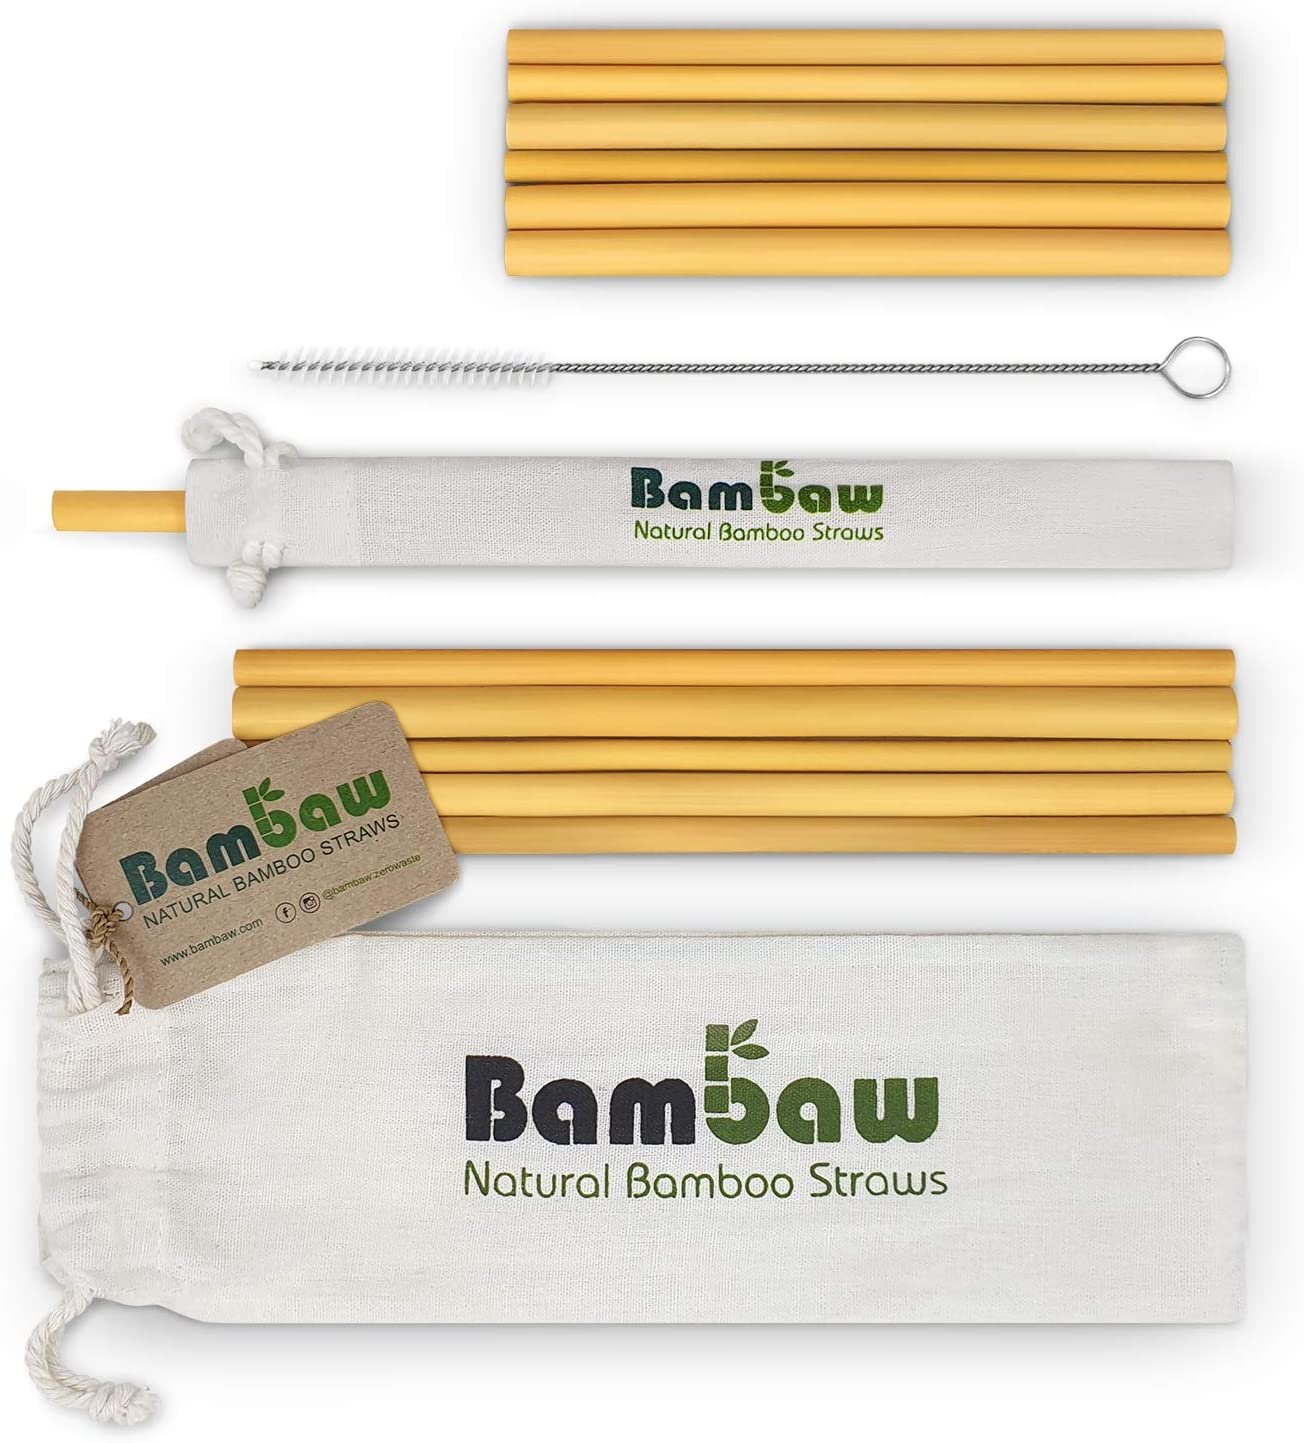 Details about   Bamboo Straw Reusable Drinking Biodegradable Natural Organic Eco Handmade Party 